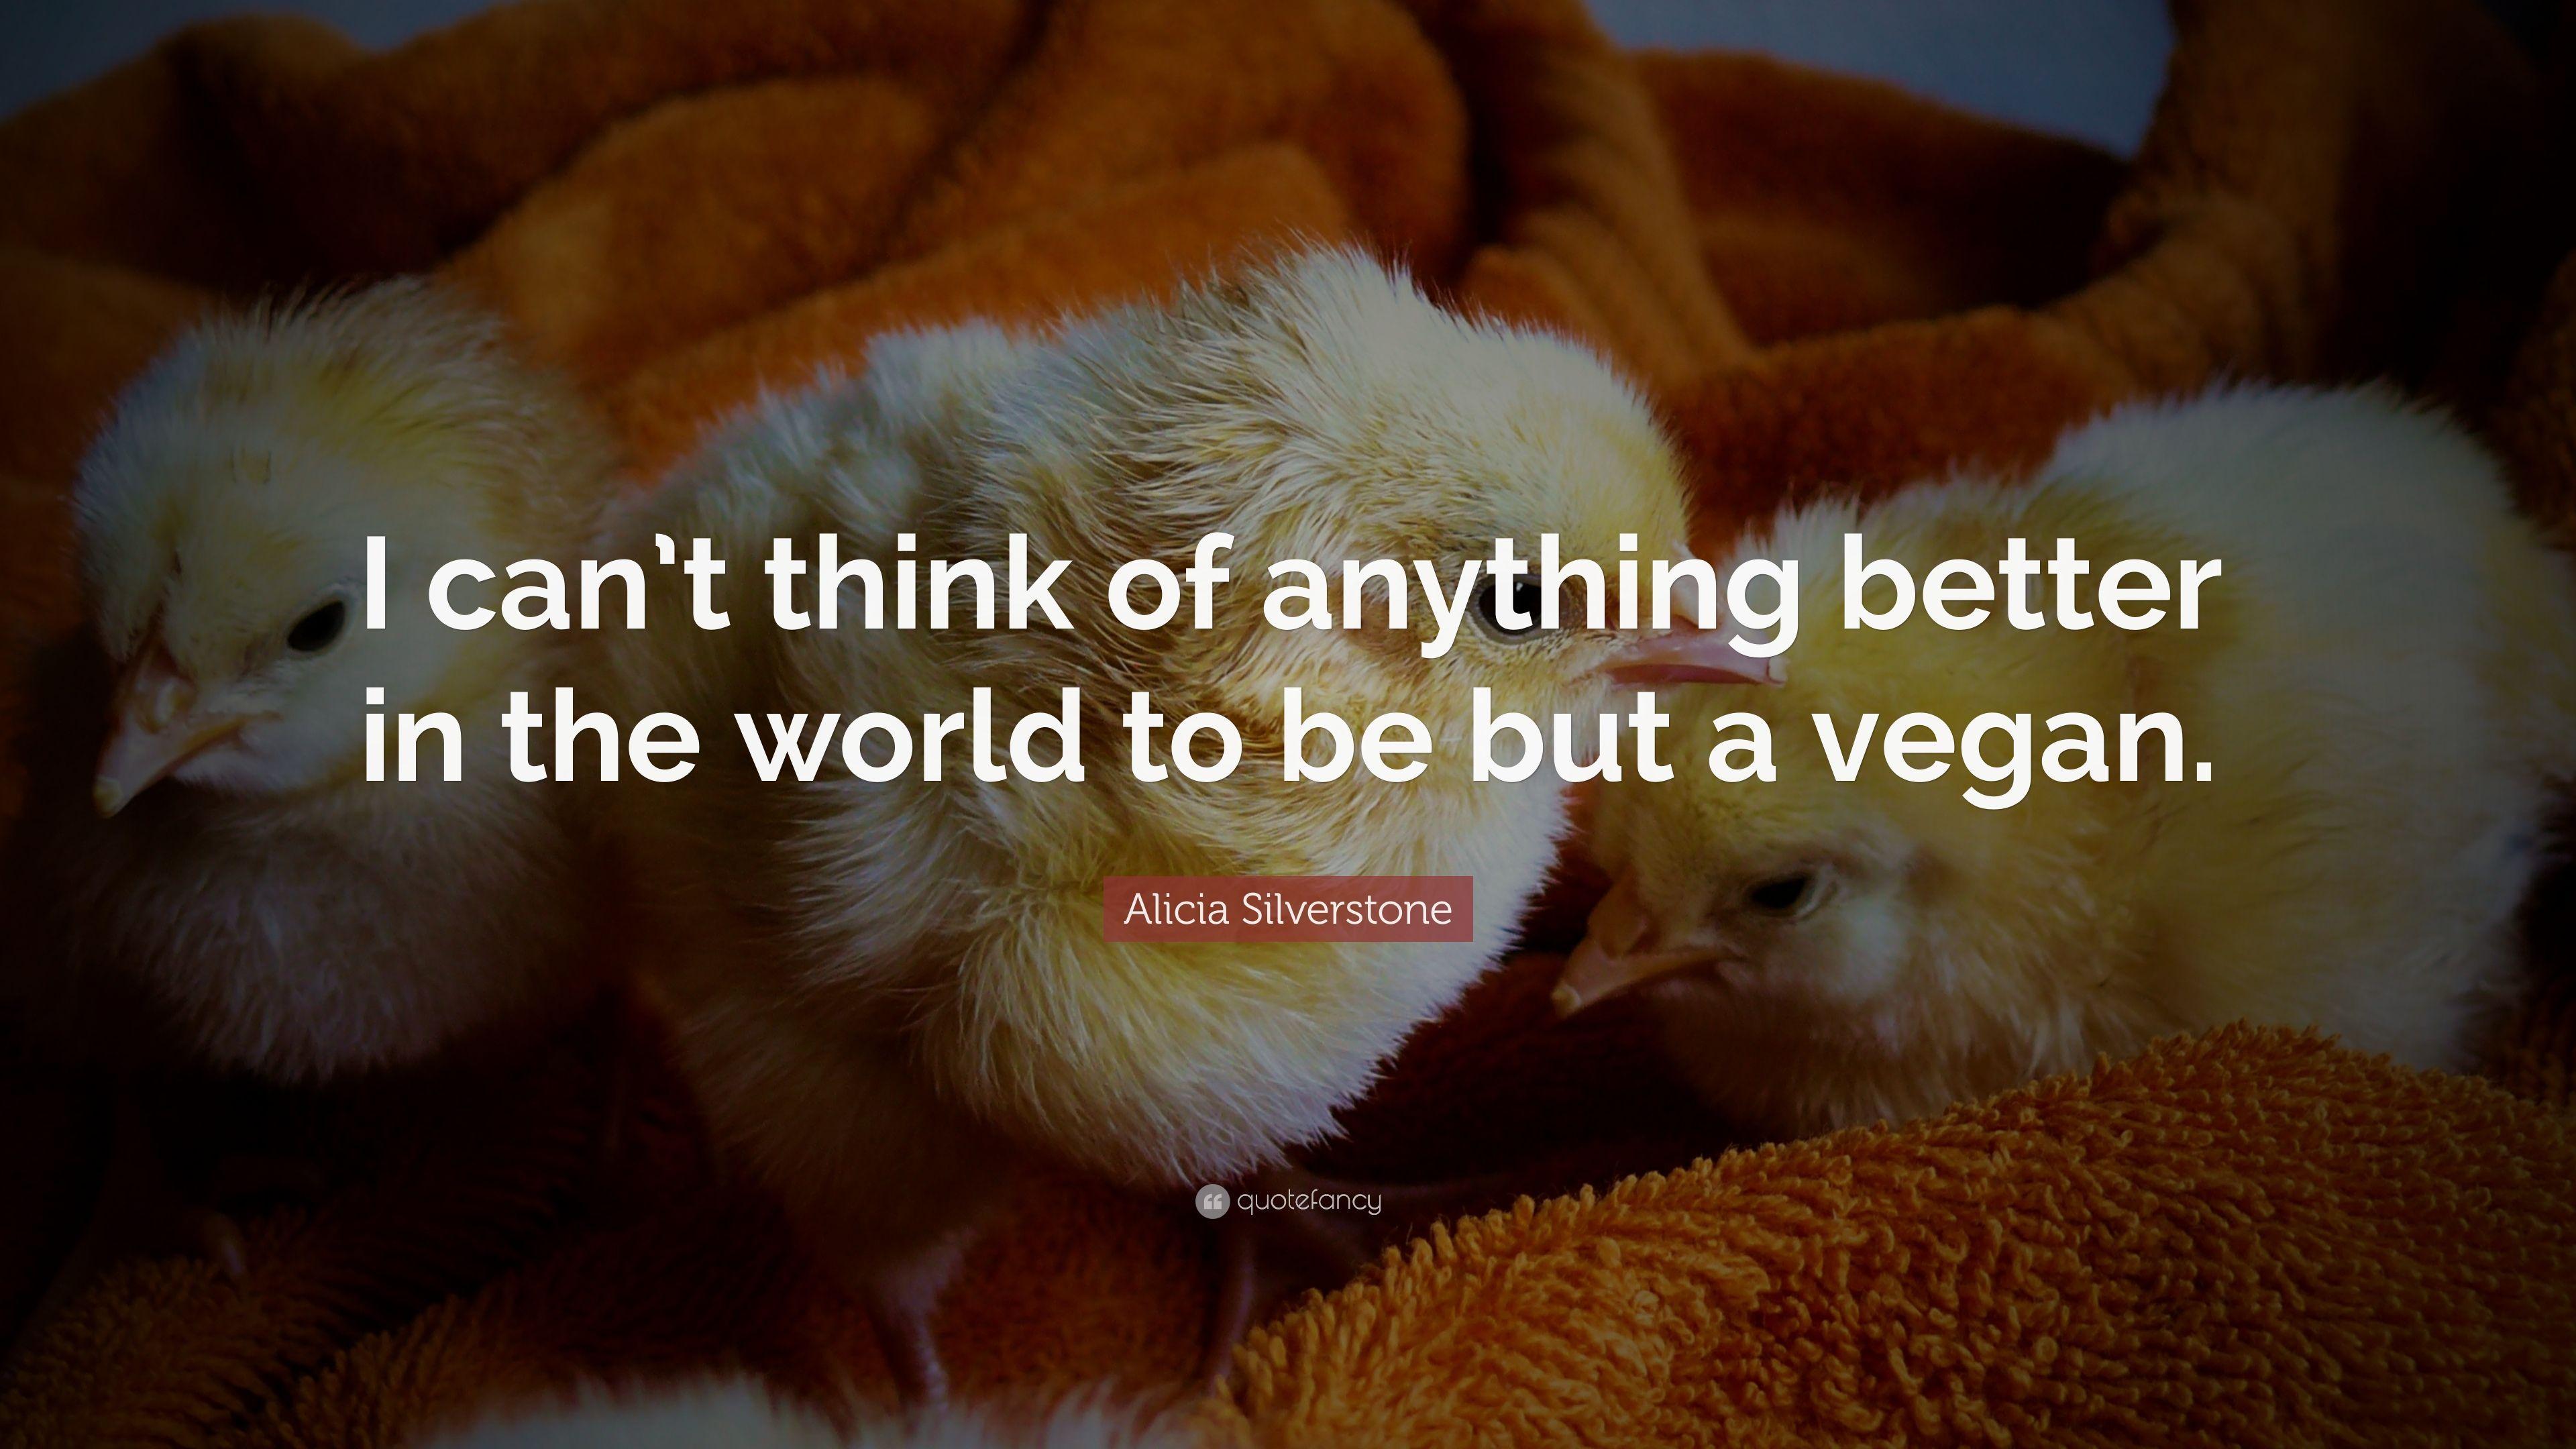 Alicia Silverstone Quote: “I can't think of anything better in